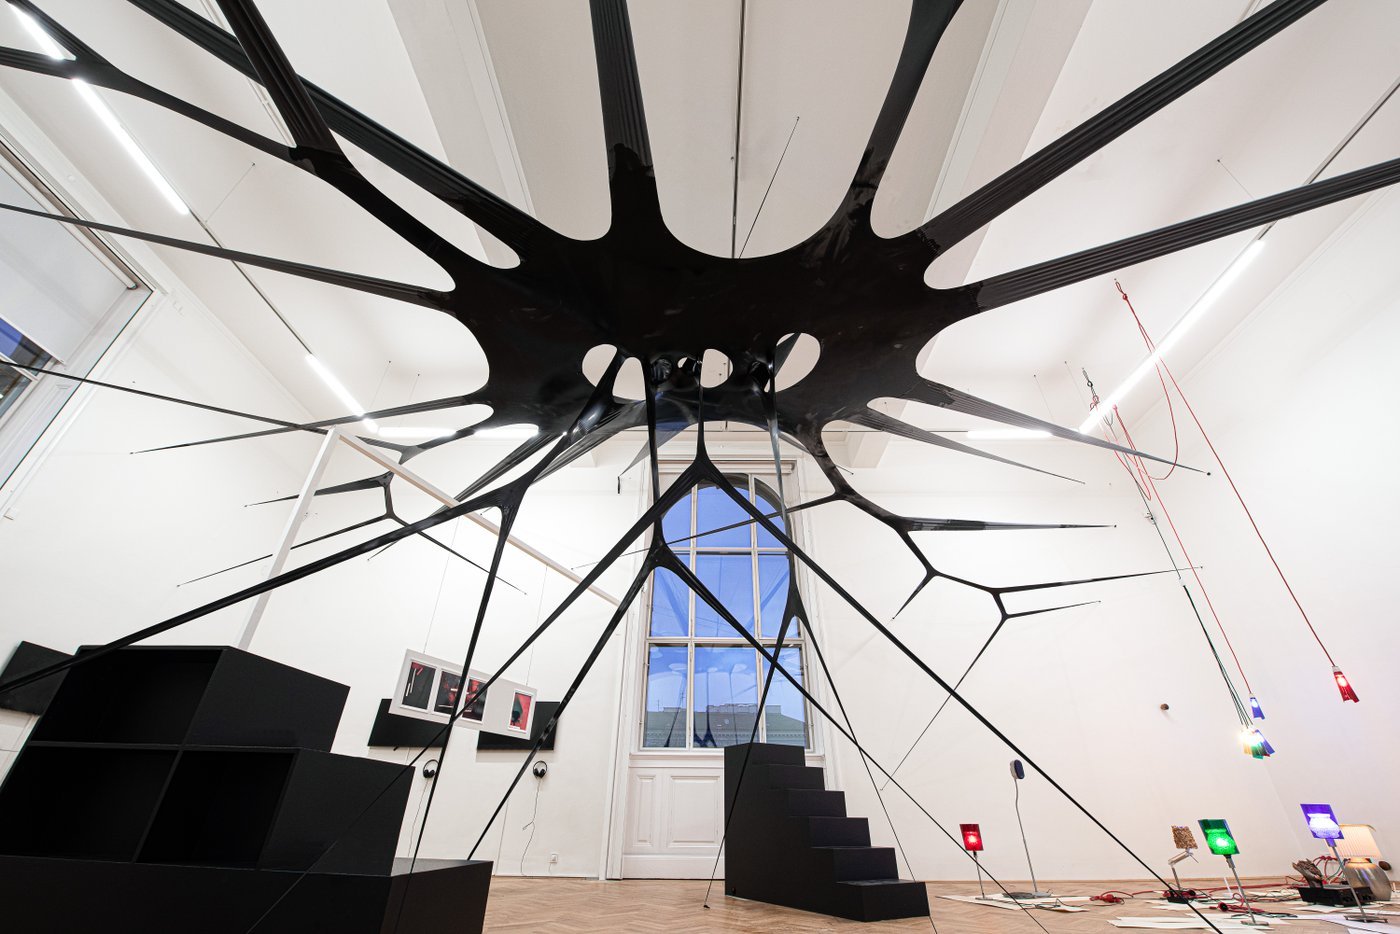 View of an exhibition room with a black spider-like structure in the center